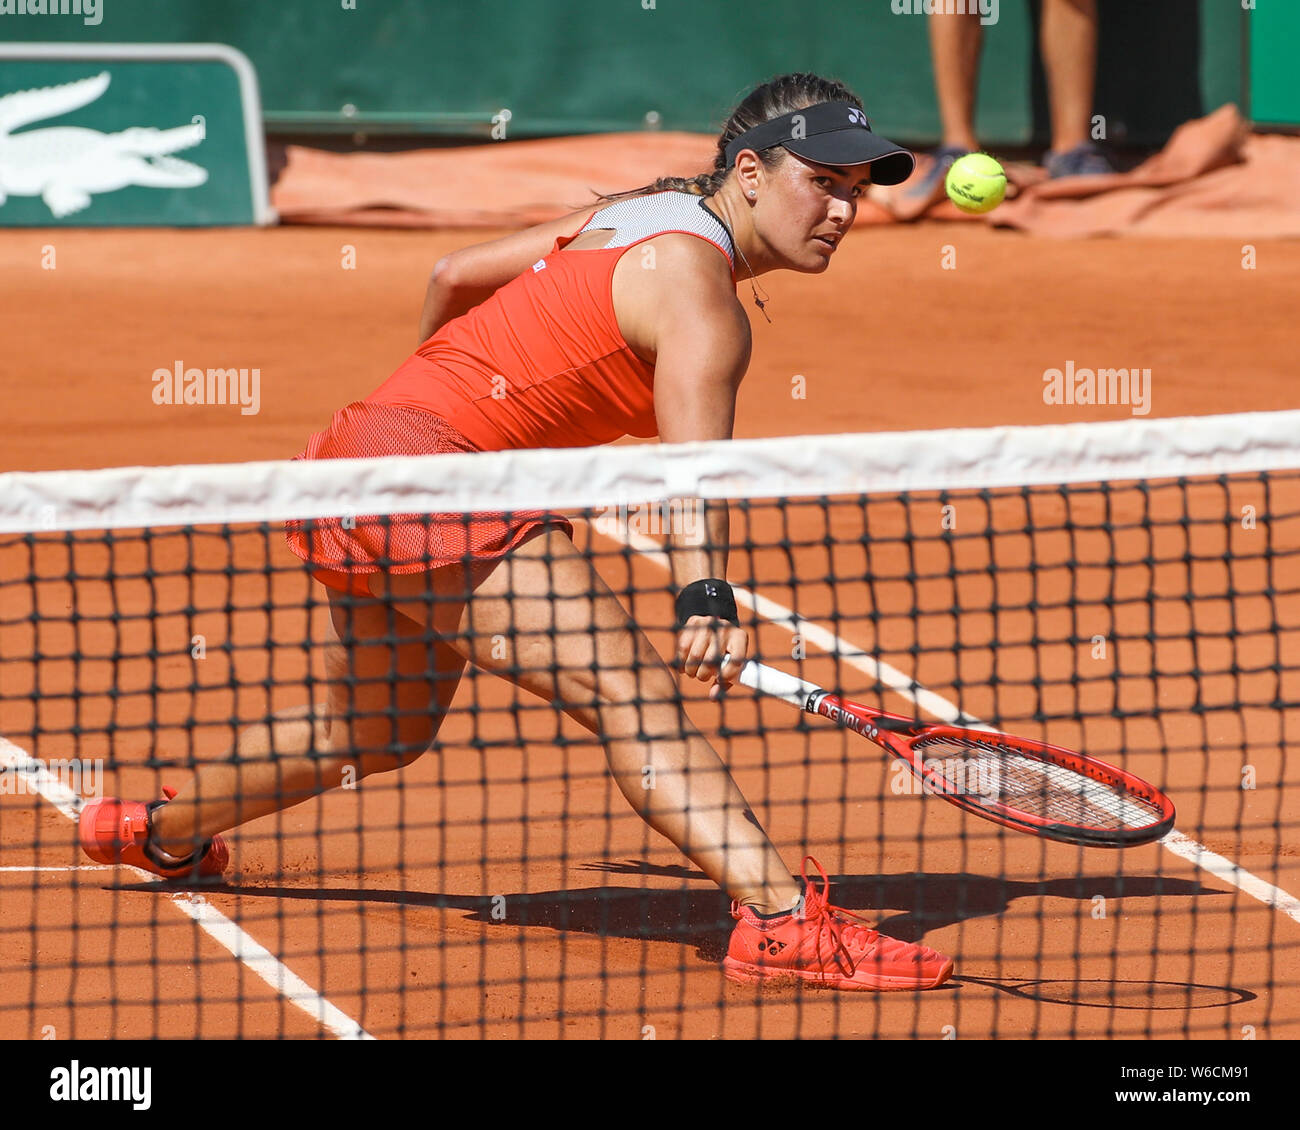 Puerto Rican tennis player Monica Puig playing backhand shot during French Open 2019, Paris, France Stock Photo